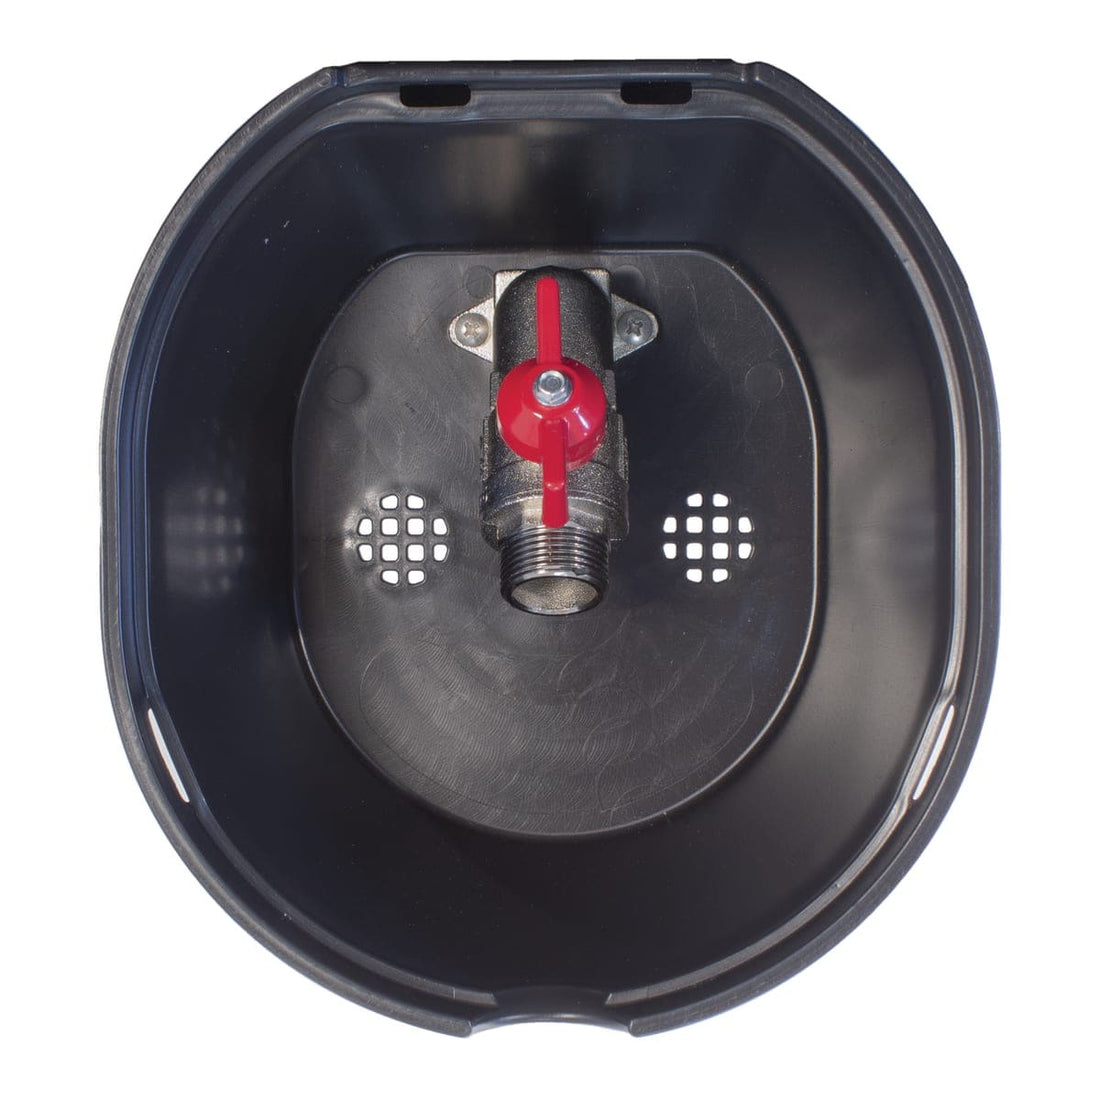 OVAL WELL WITH TAP - best price from Maltashopper.com BR500014749